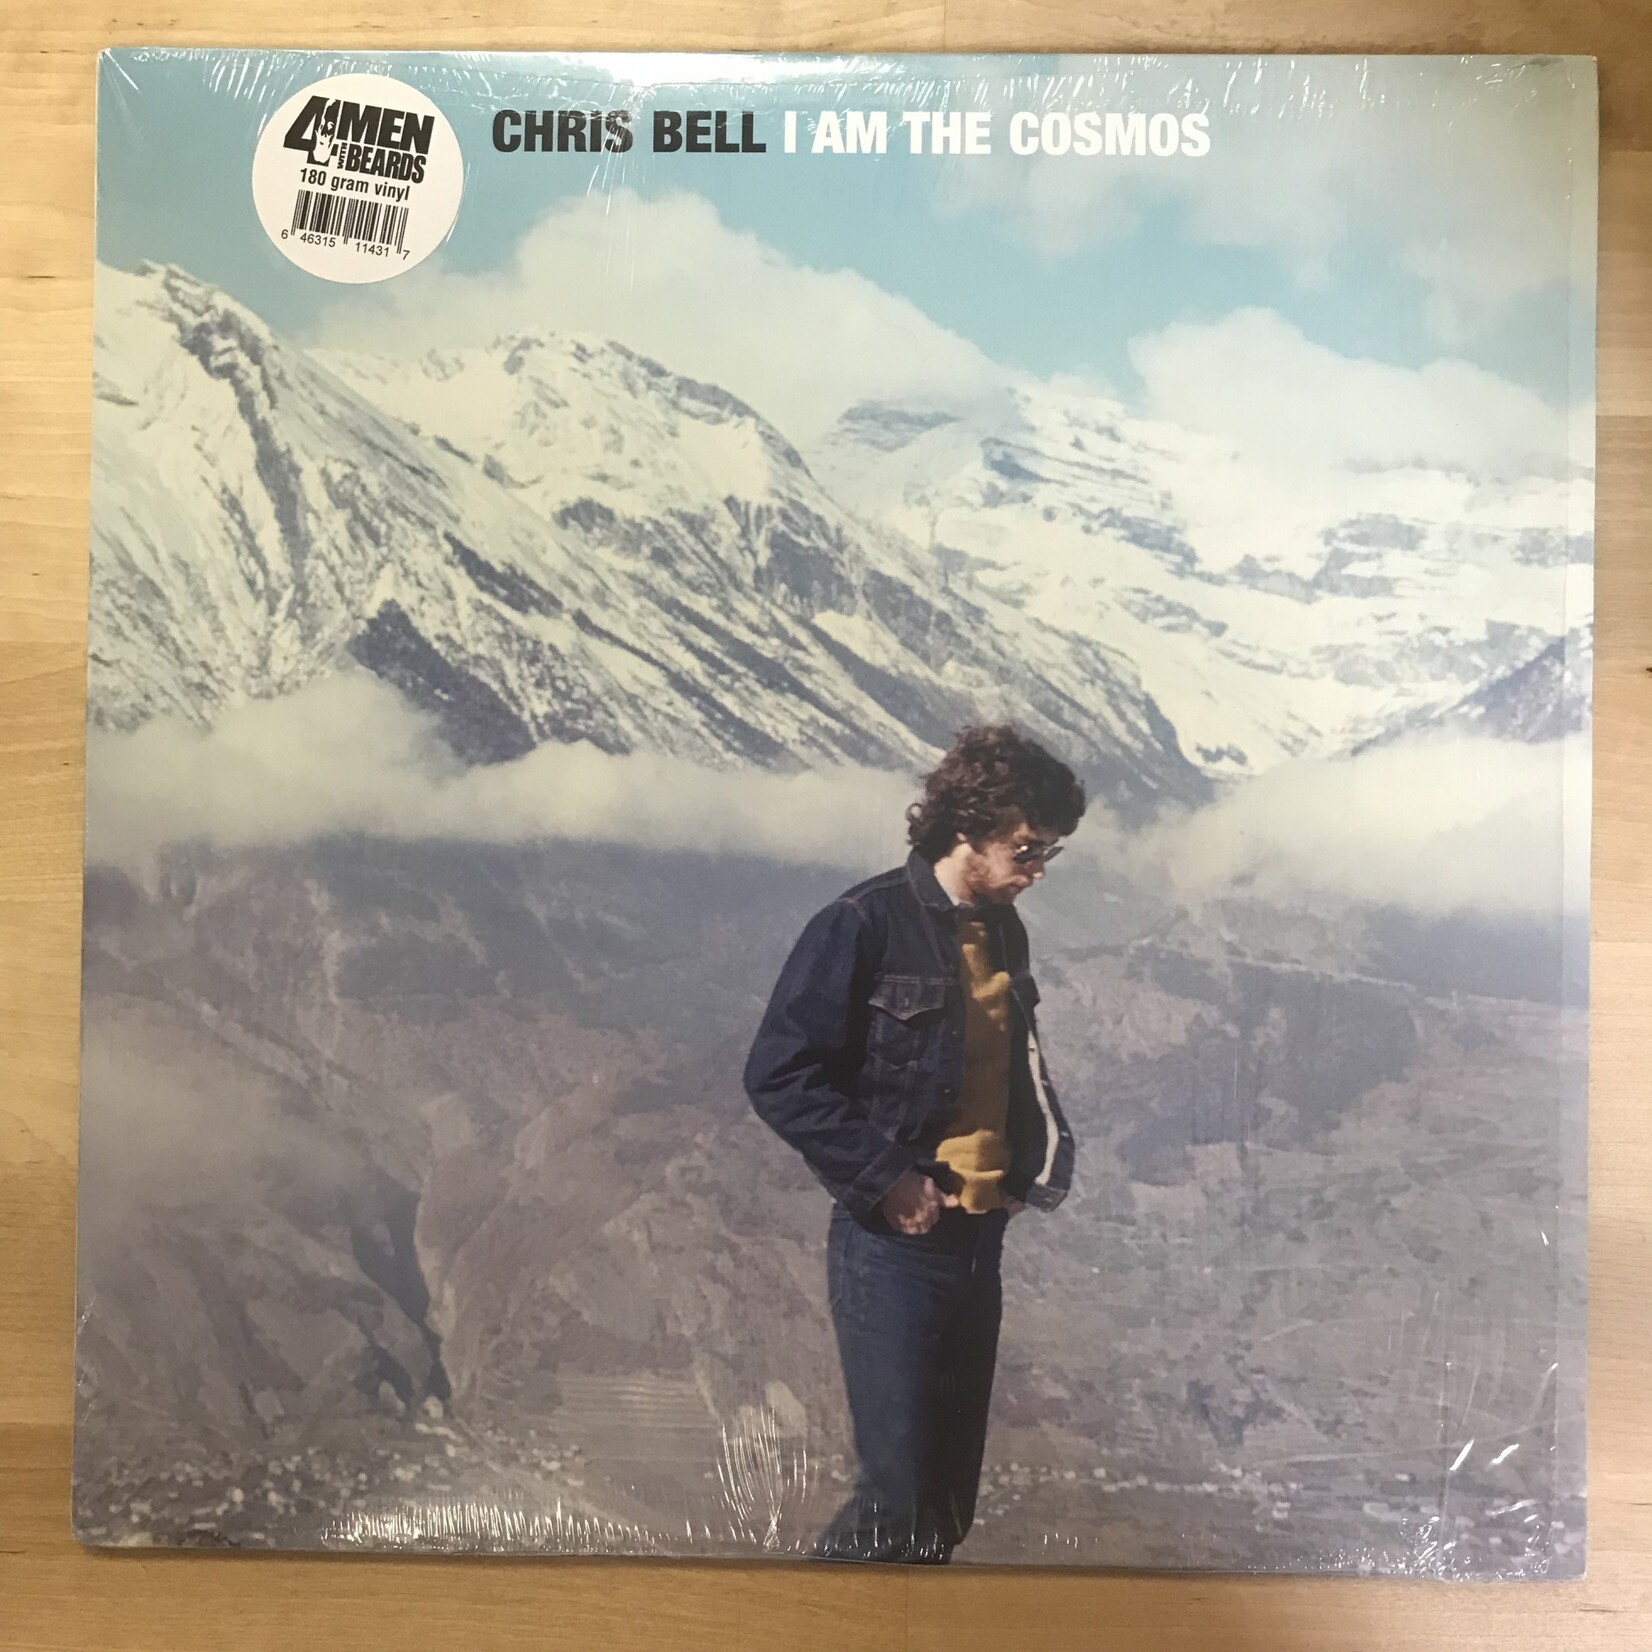 Chris Bell - I Am the Cosmos - 4M143 - Vinyl LP (USED)